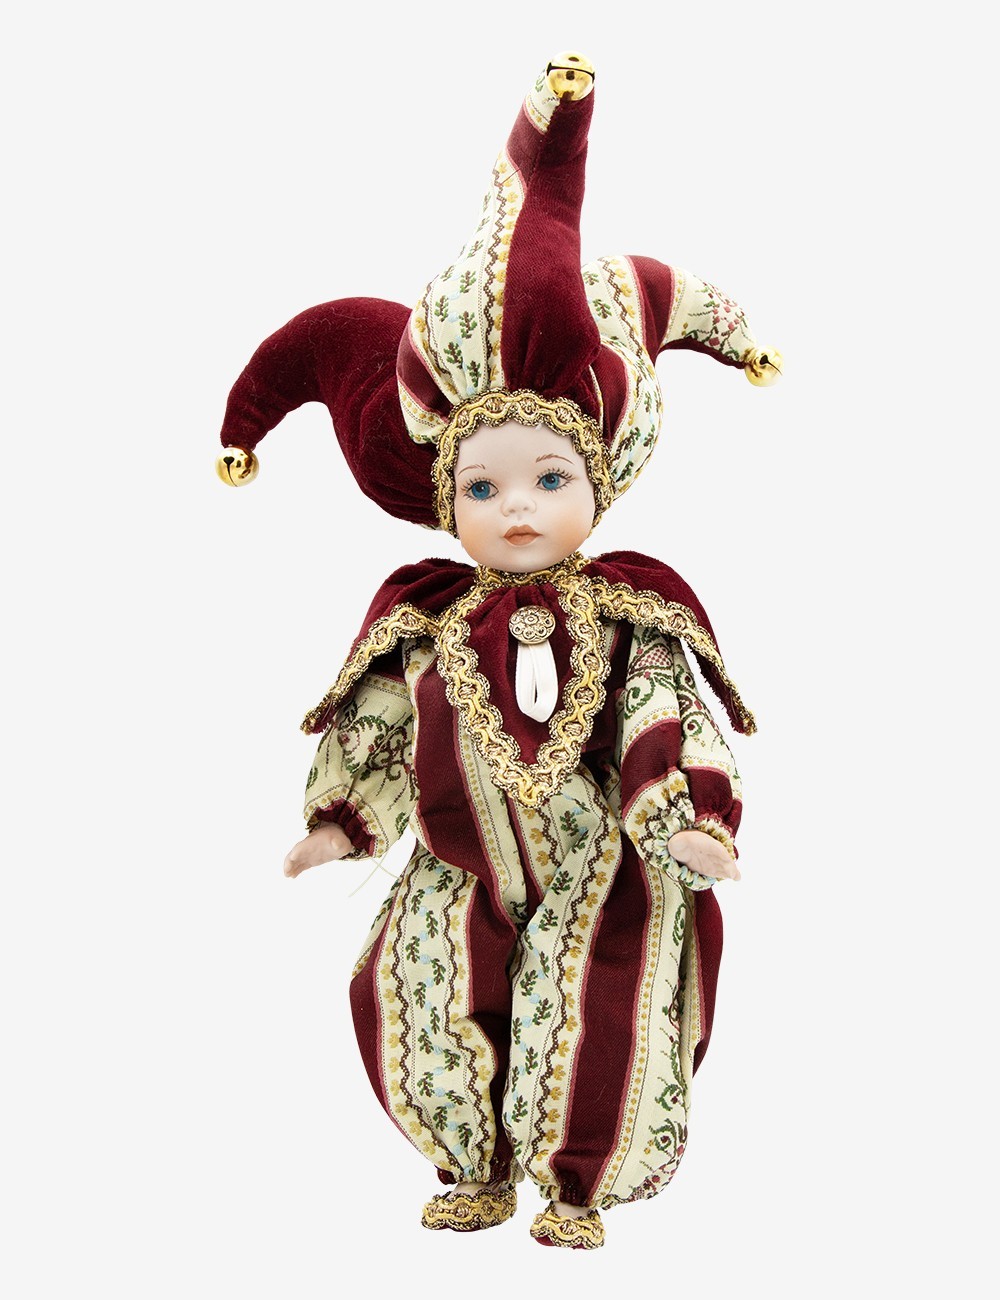 Maxi Triangel 003 - Bordeaux | Doll For Sale Genuine Handcrafted in Italy